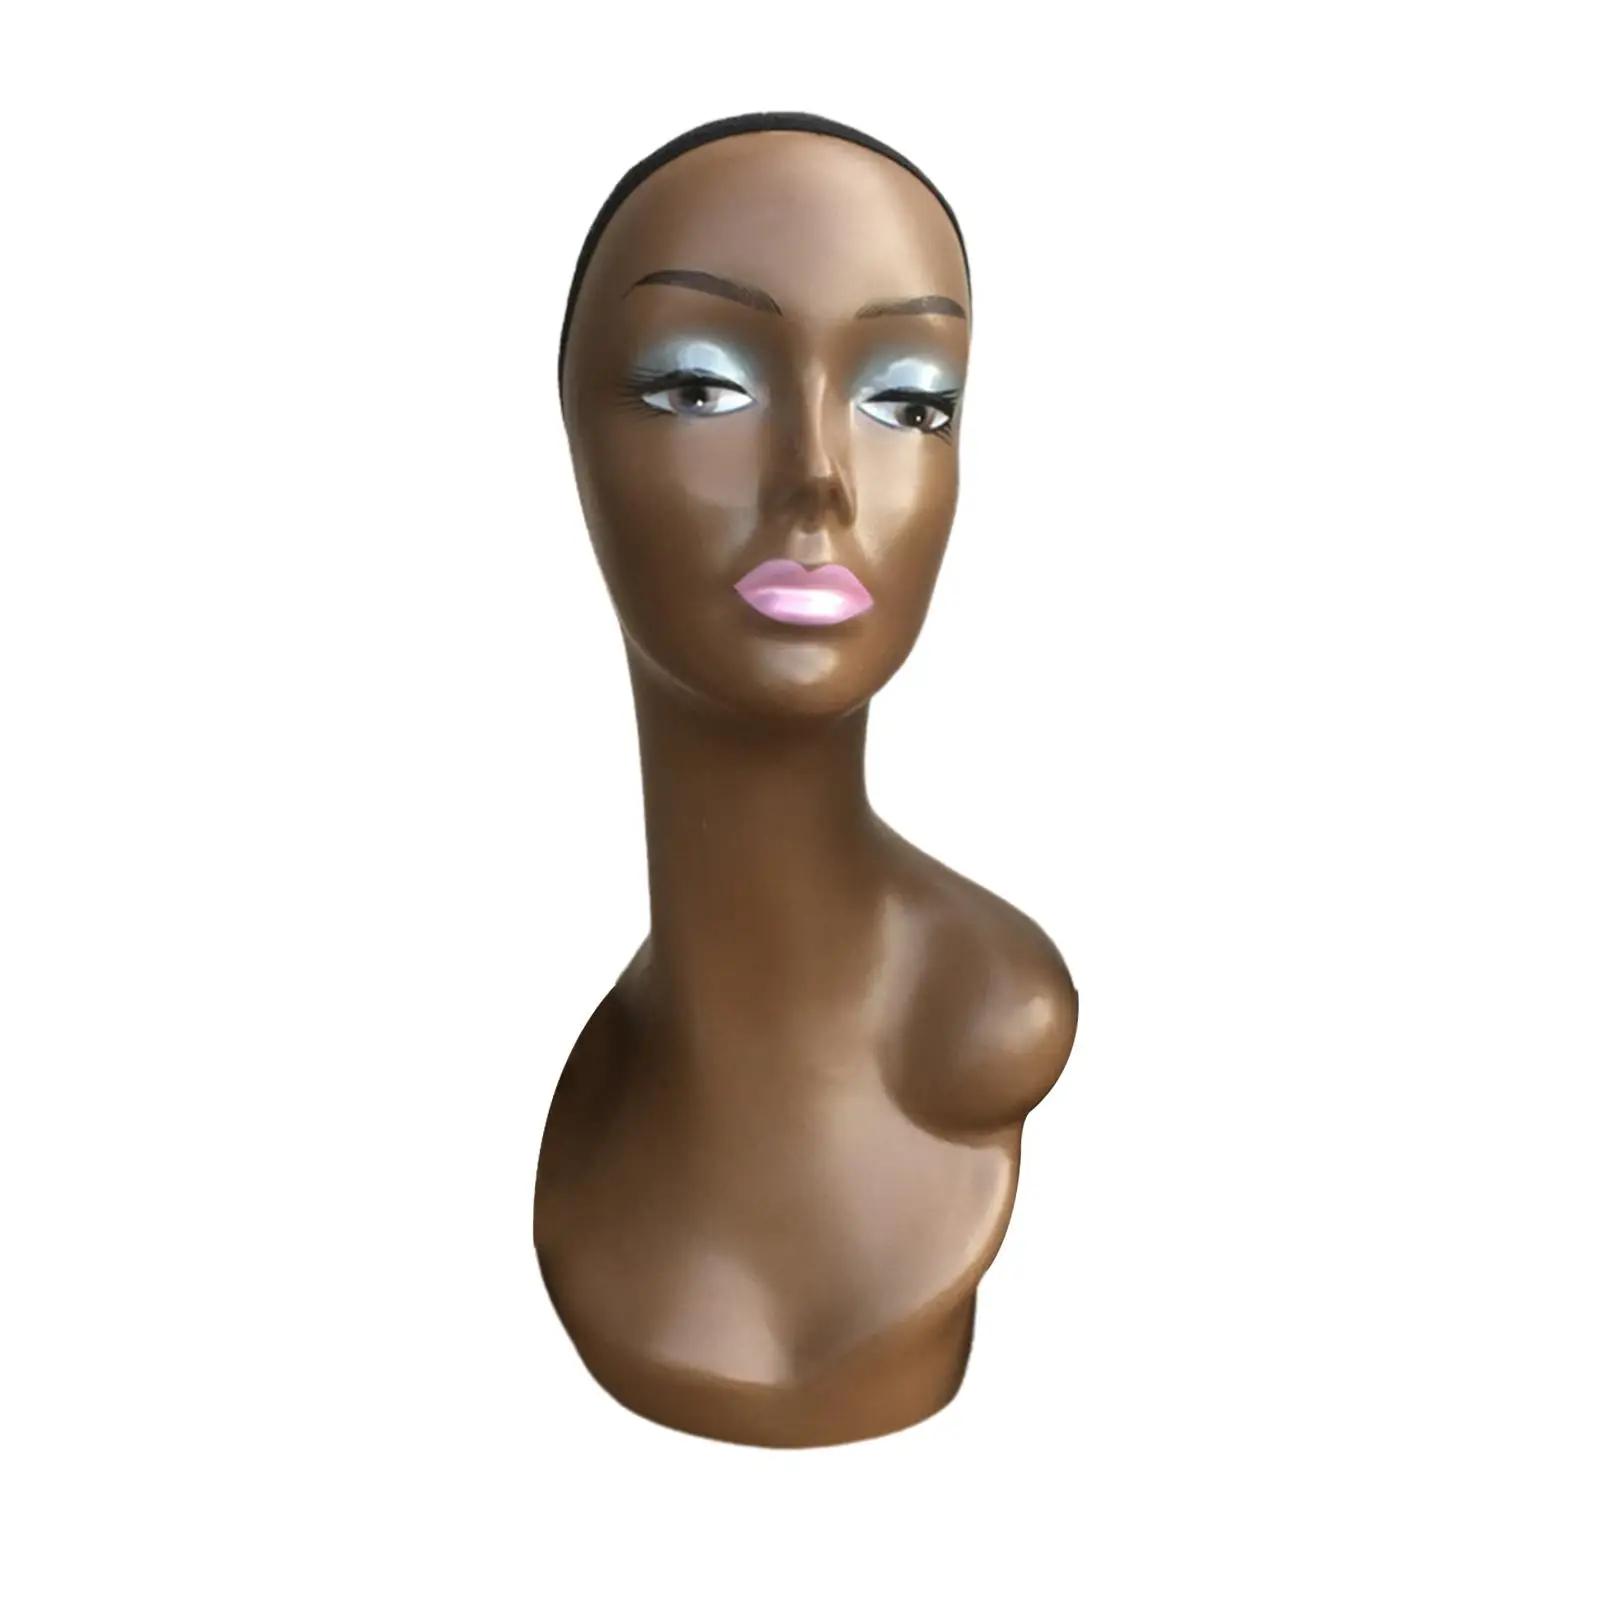 Woman Mannequin Head Model Sturdy Smooth Surface Multipurpose Practical Hat Display Stand Height 48cm Lifelike for Styling